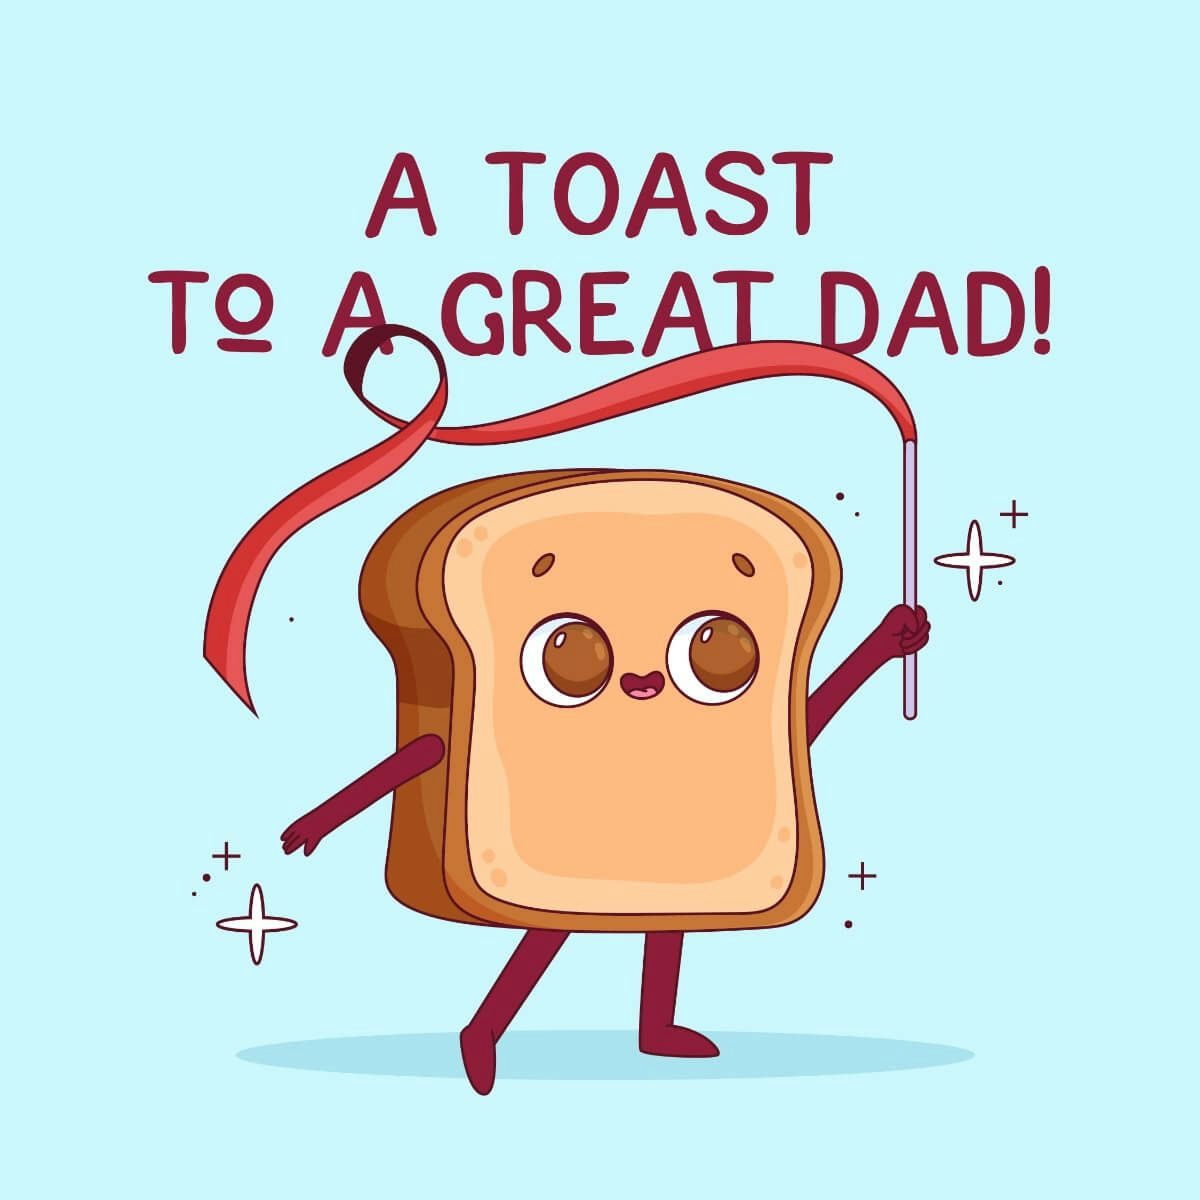 Card A toast to a great dad